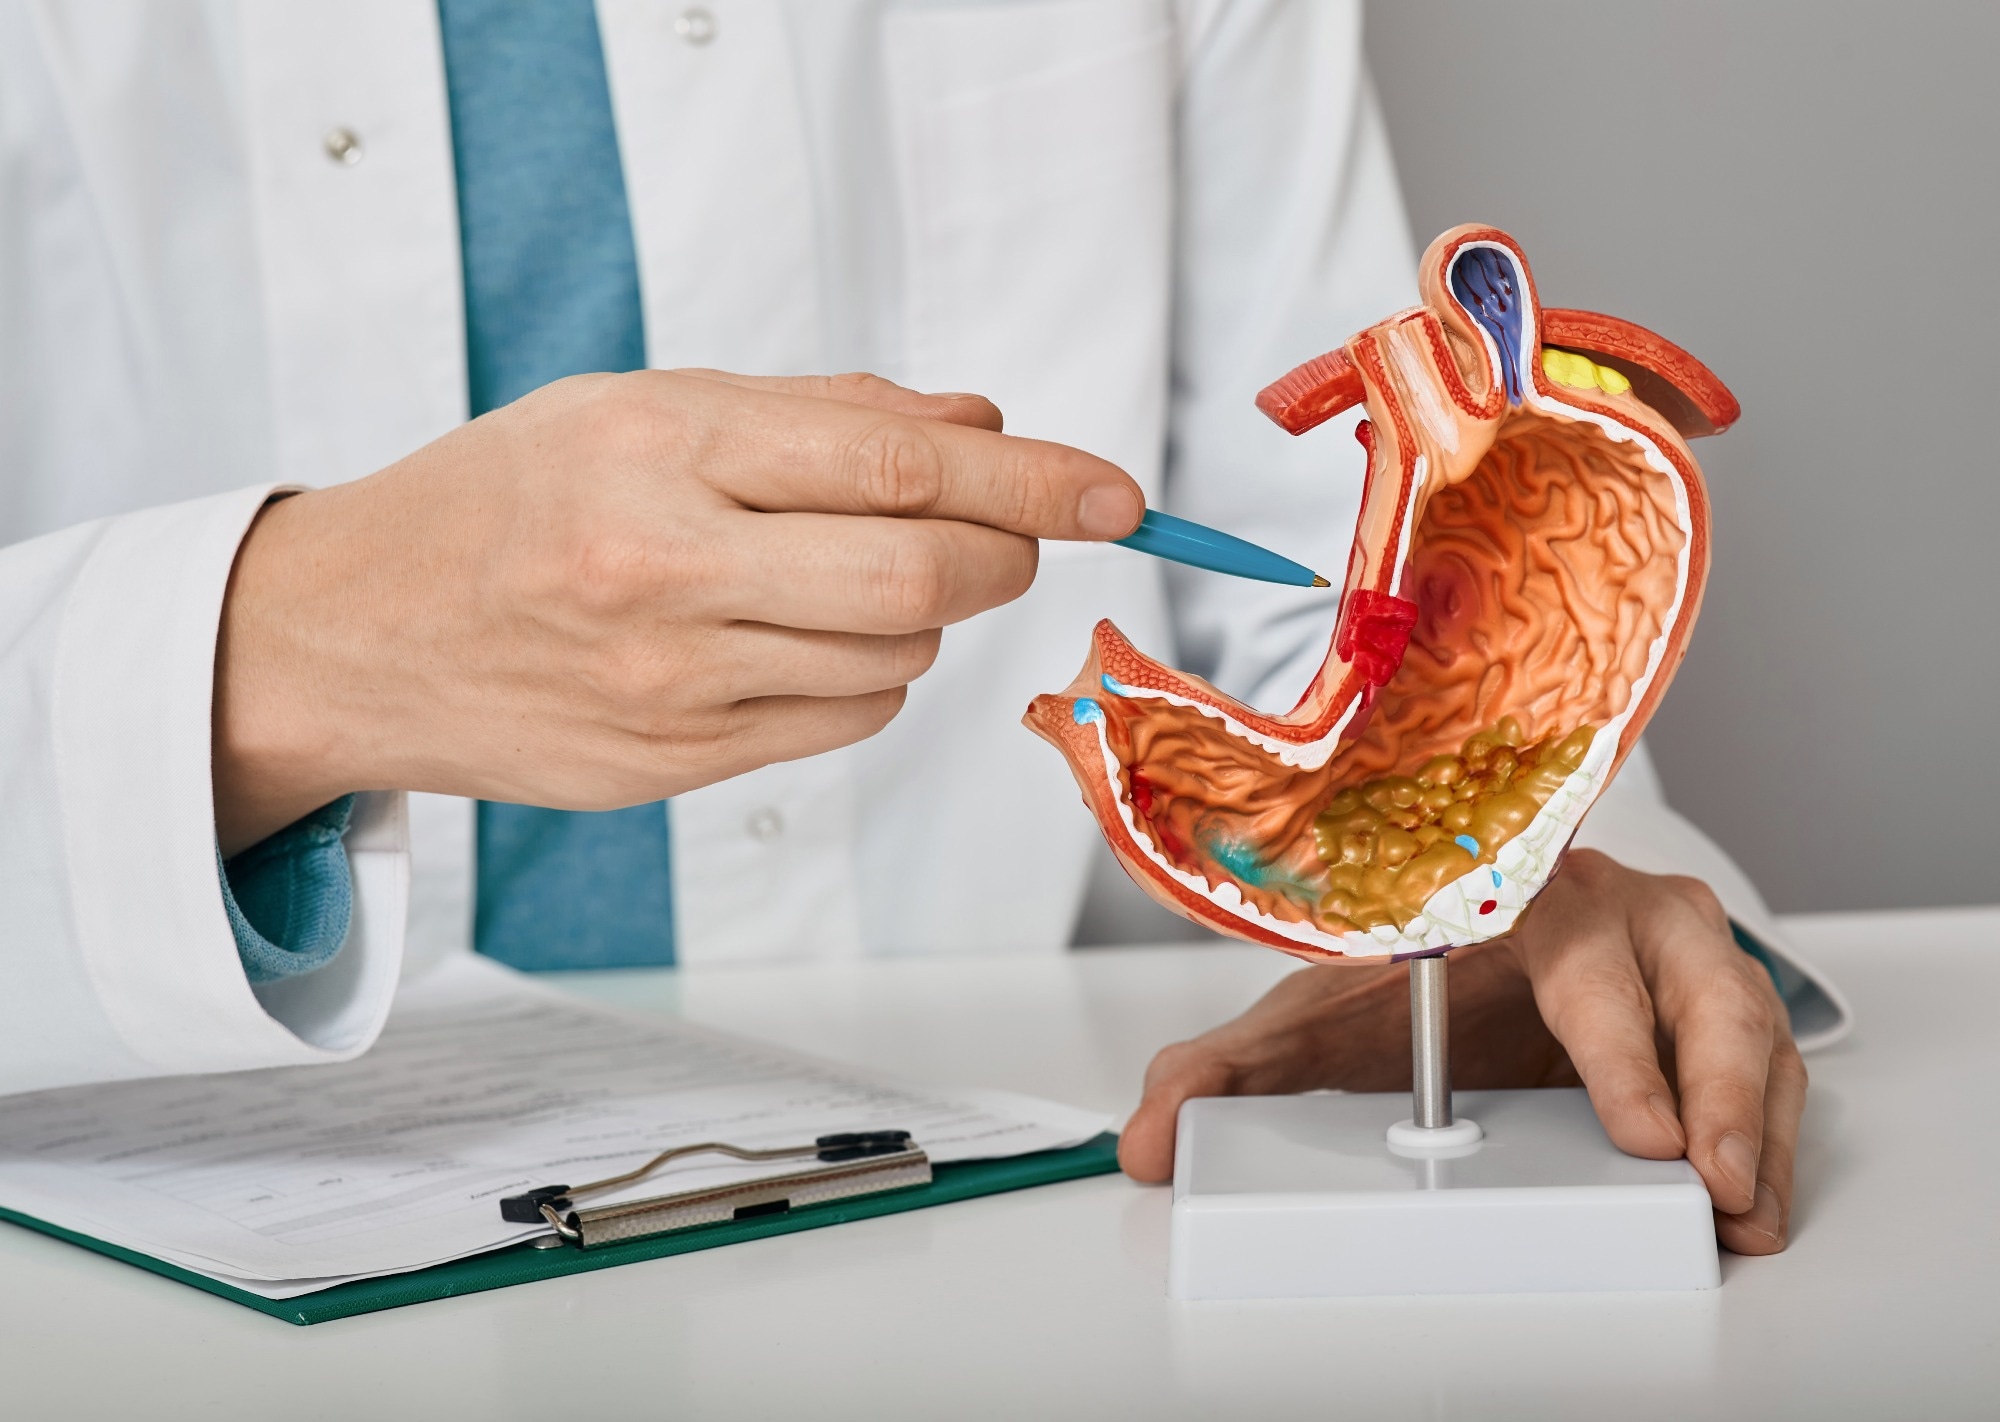 Study: Review of dietary patterns and gastric cancer risk: epidemiology and biological evidence. Image Credit: Peakstock/Shutterstock.com